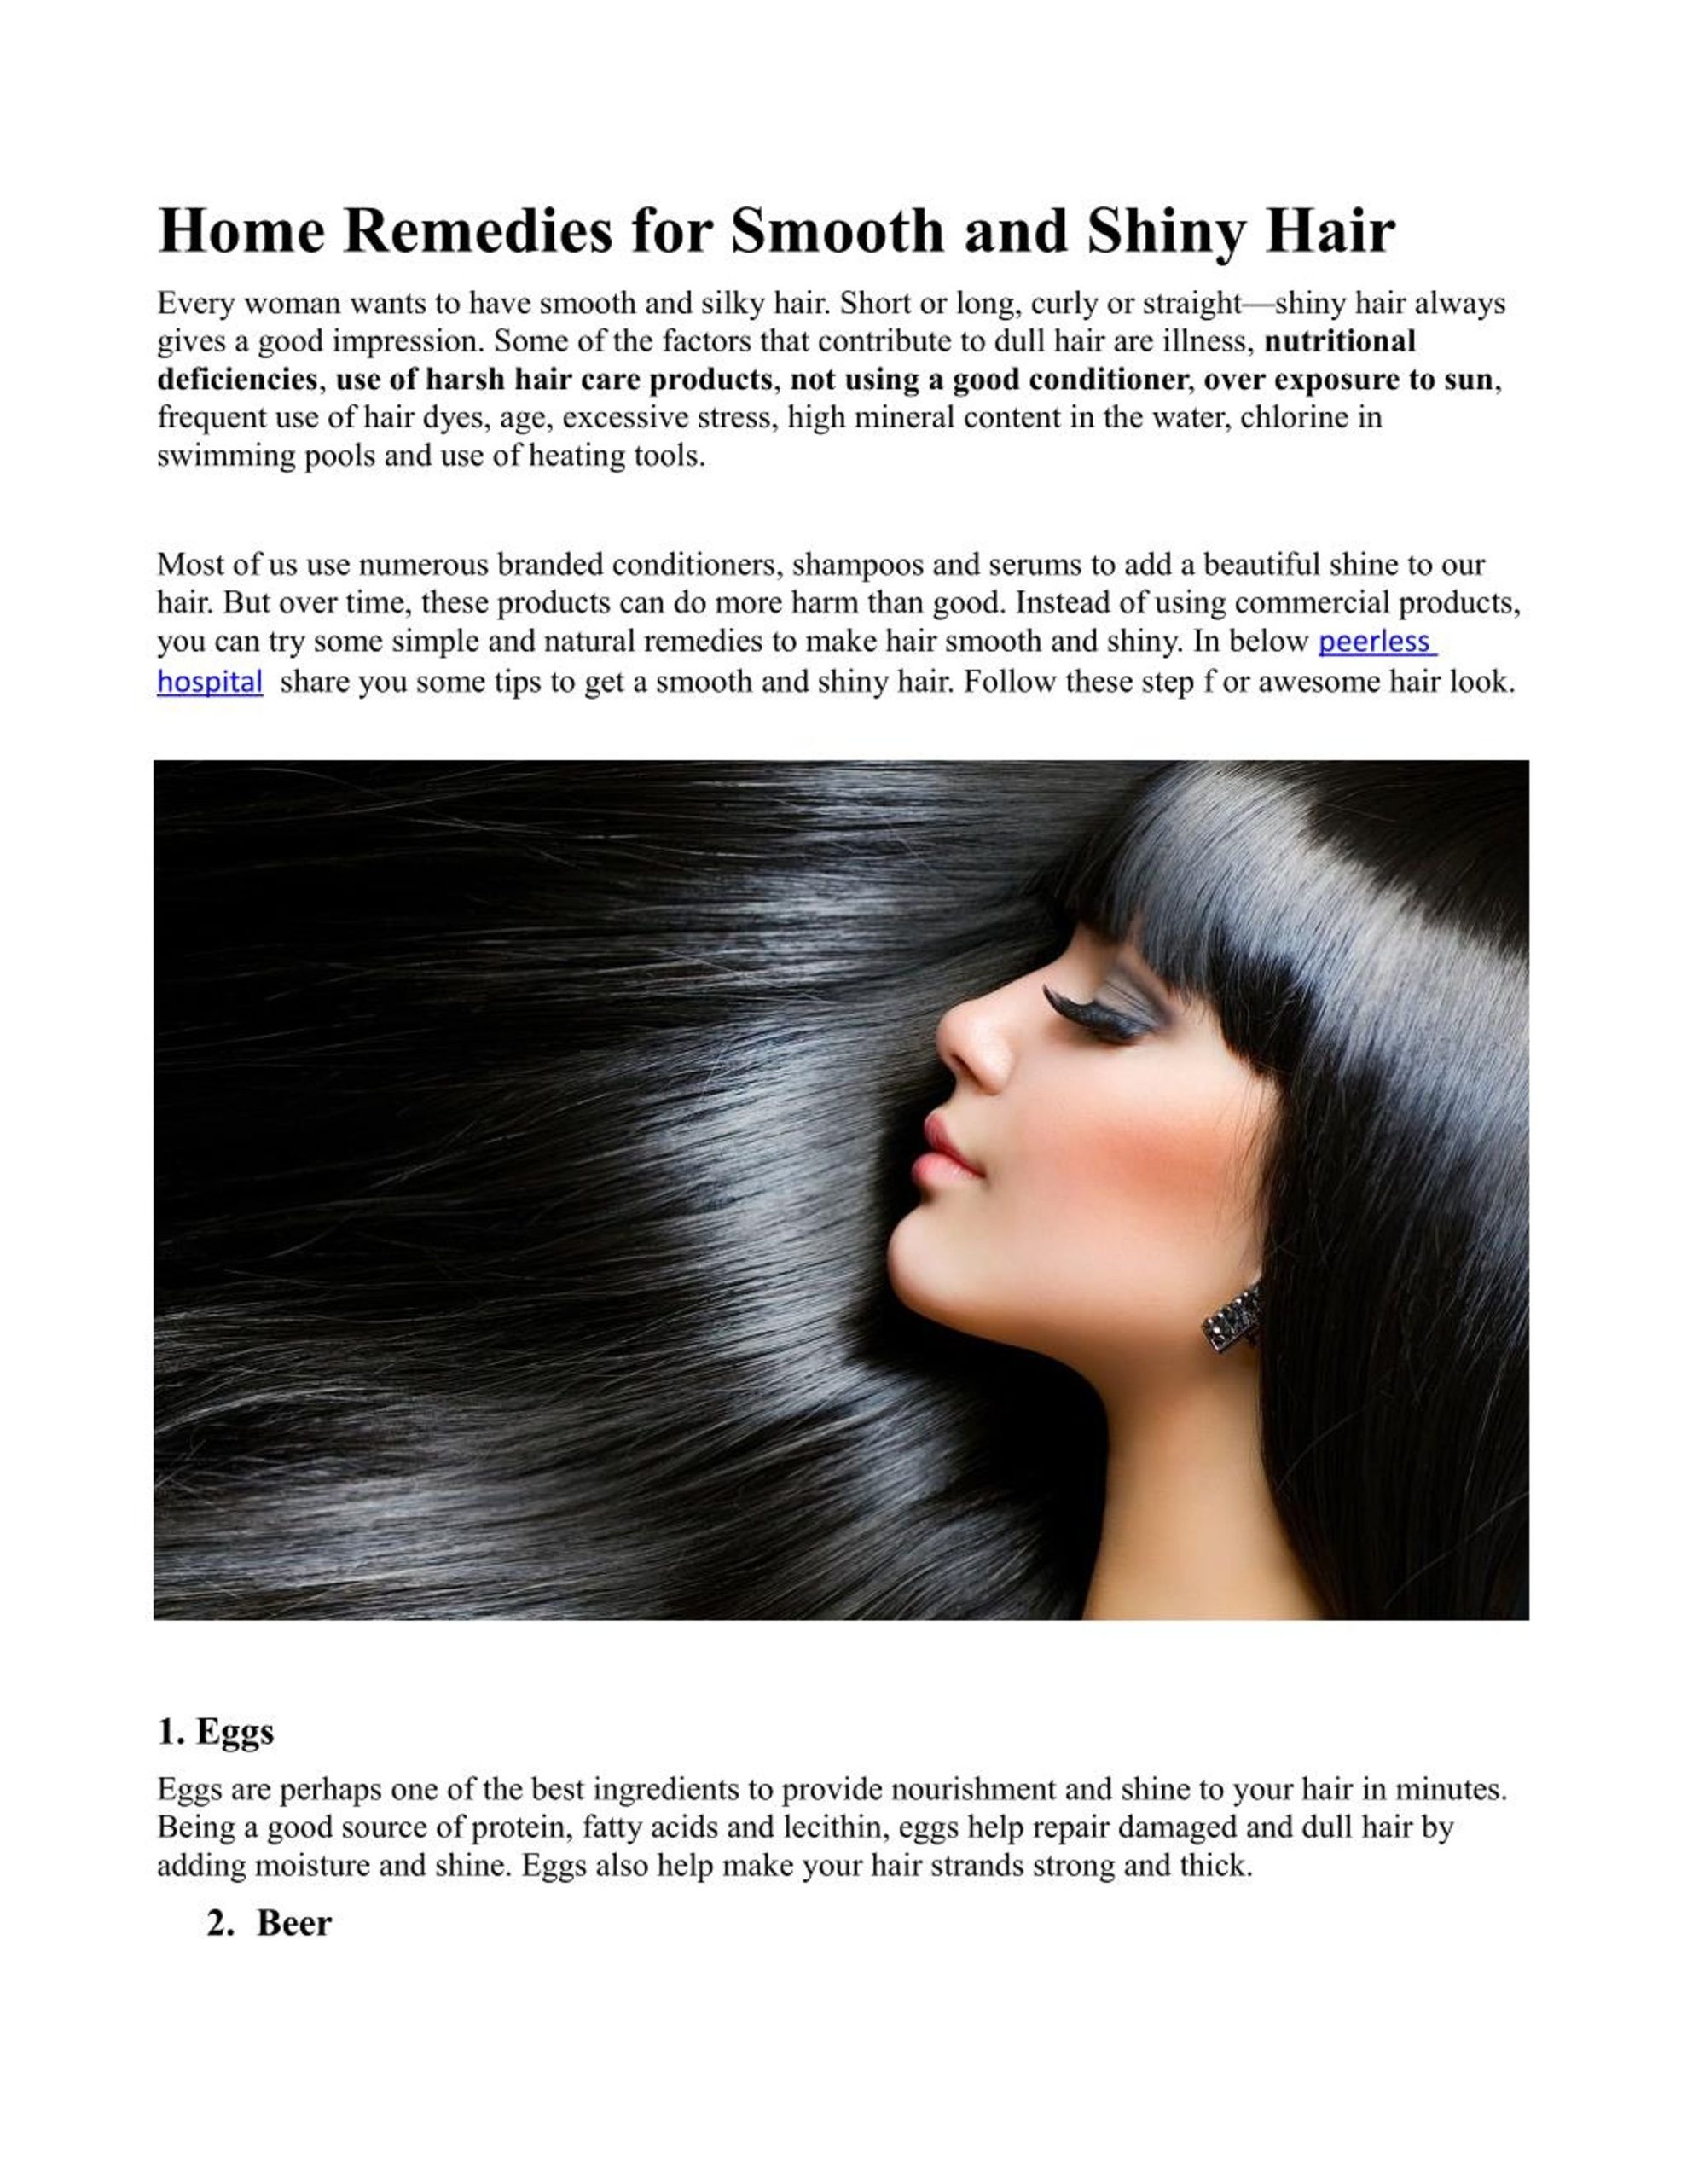 best home remedies for smooth and silky hair